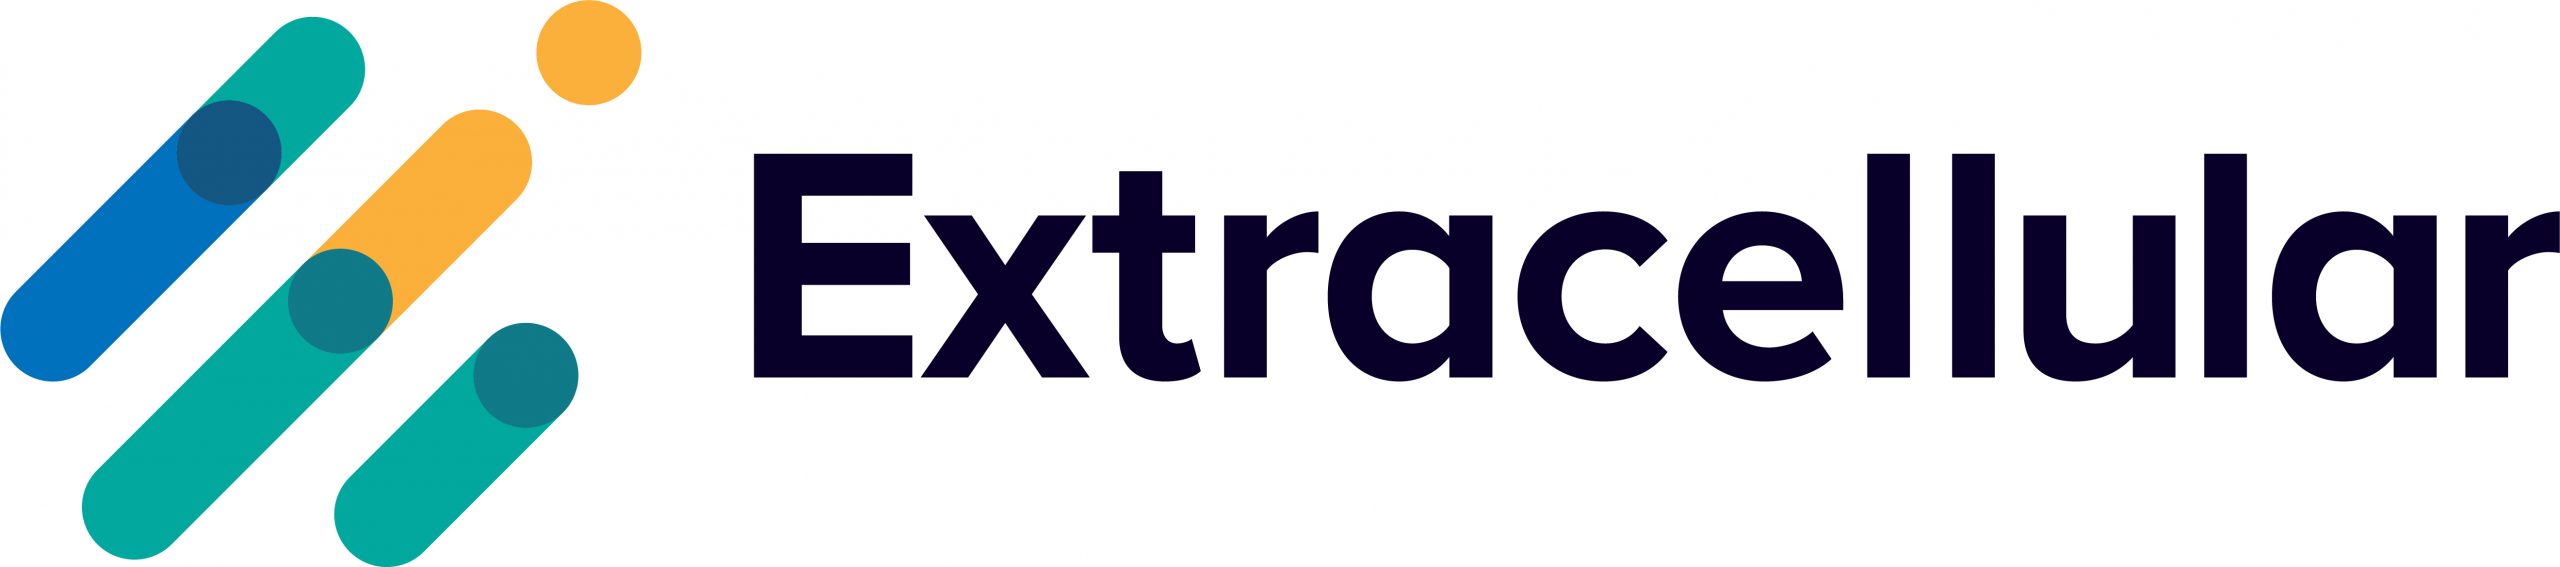 Logo for Extracellular. Extracellular is a current customer of MontBlancAI